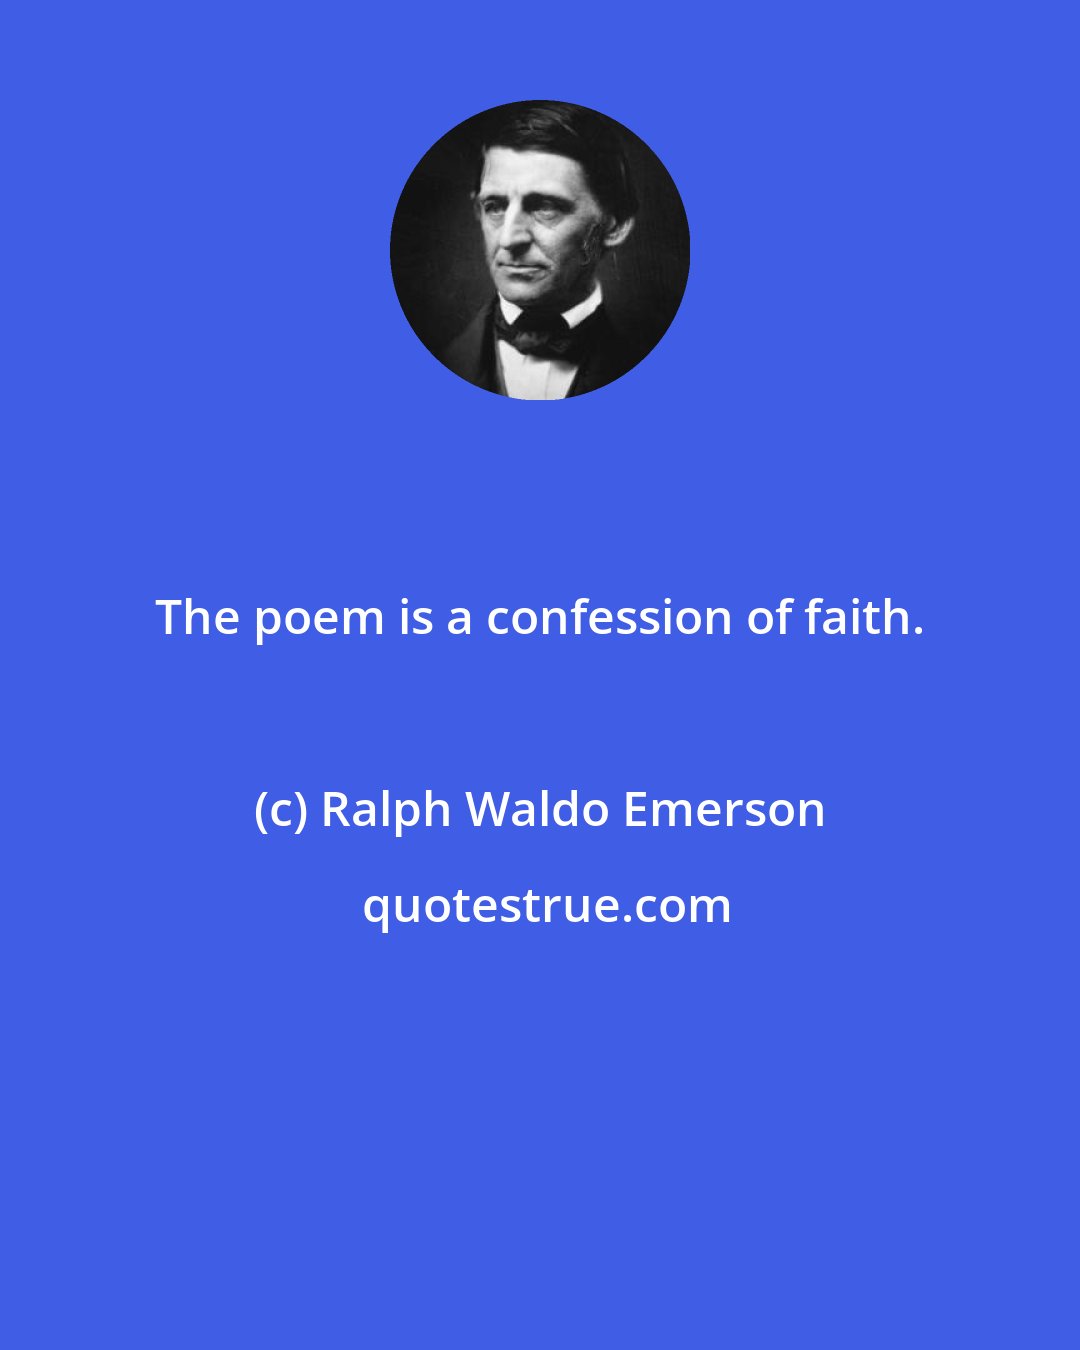 Ralph Waldo Emerson: The poem is a confession of faith.